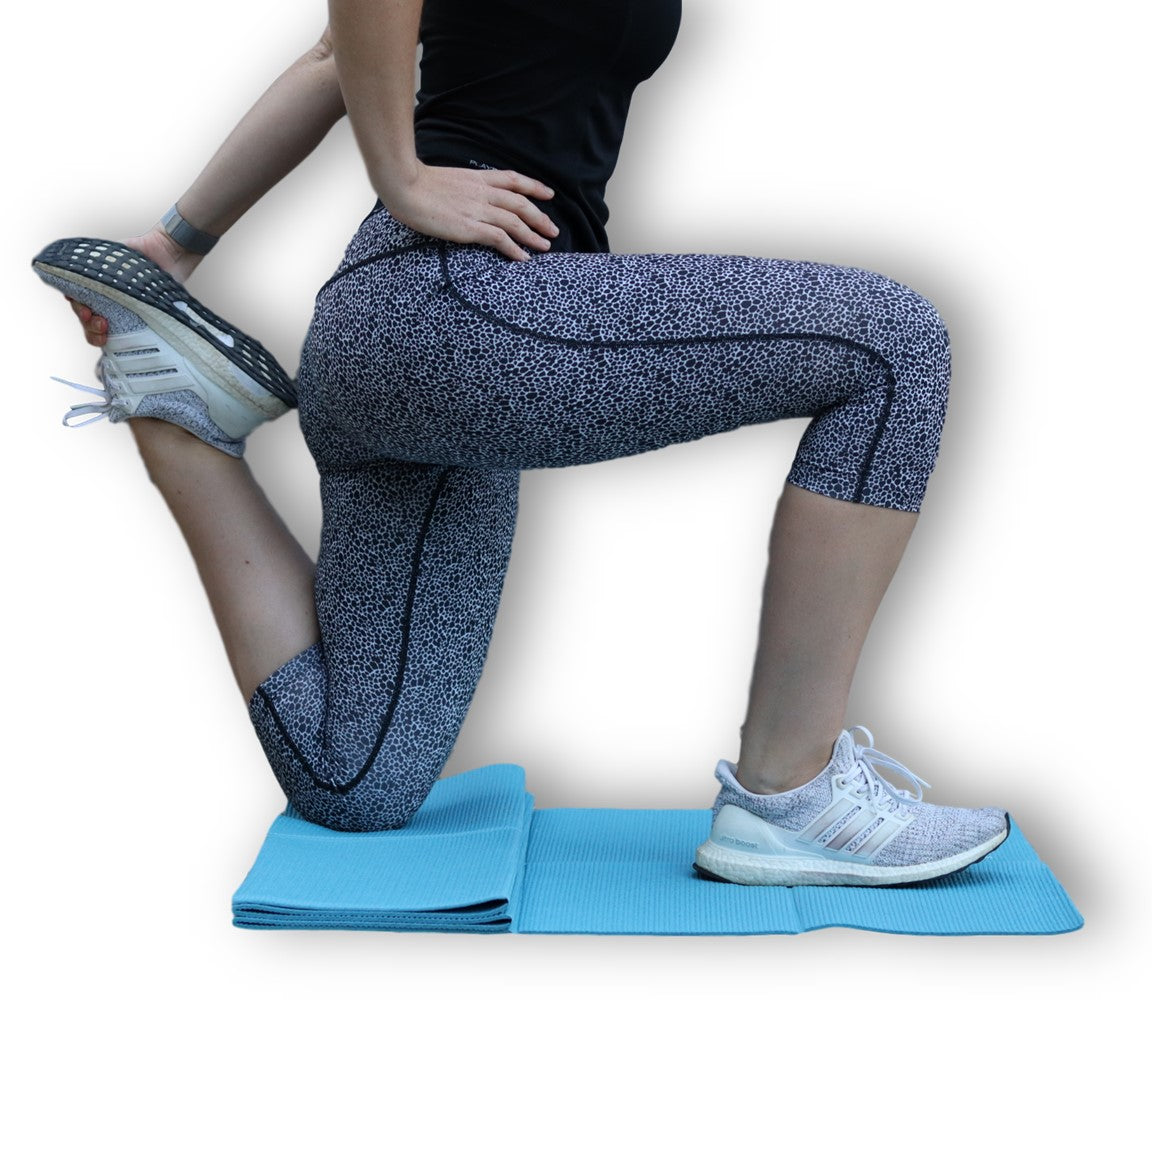 Foldable Exercise Mat - Compact & Convenient Sizing